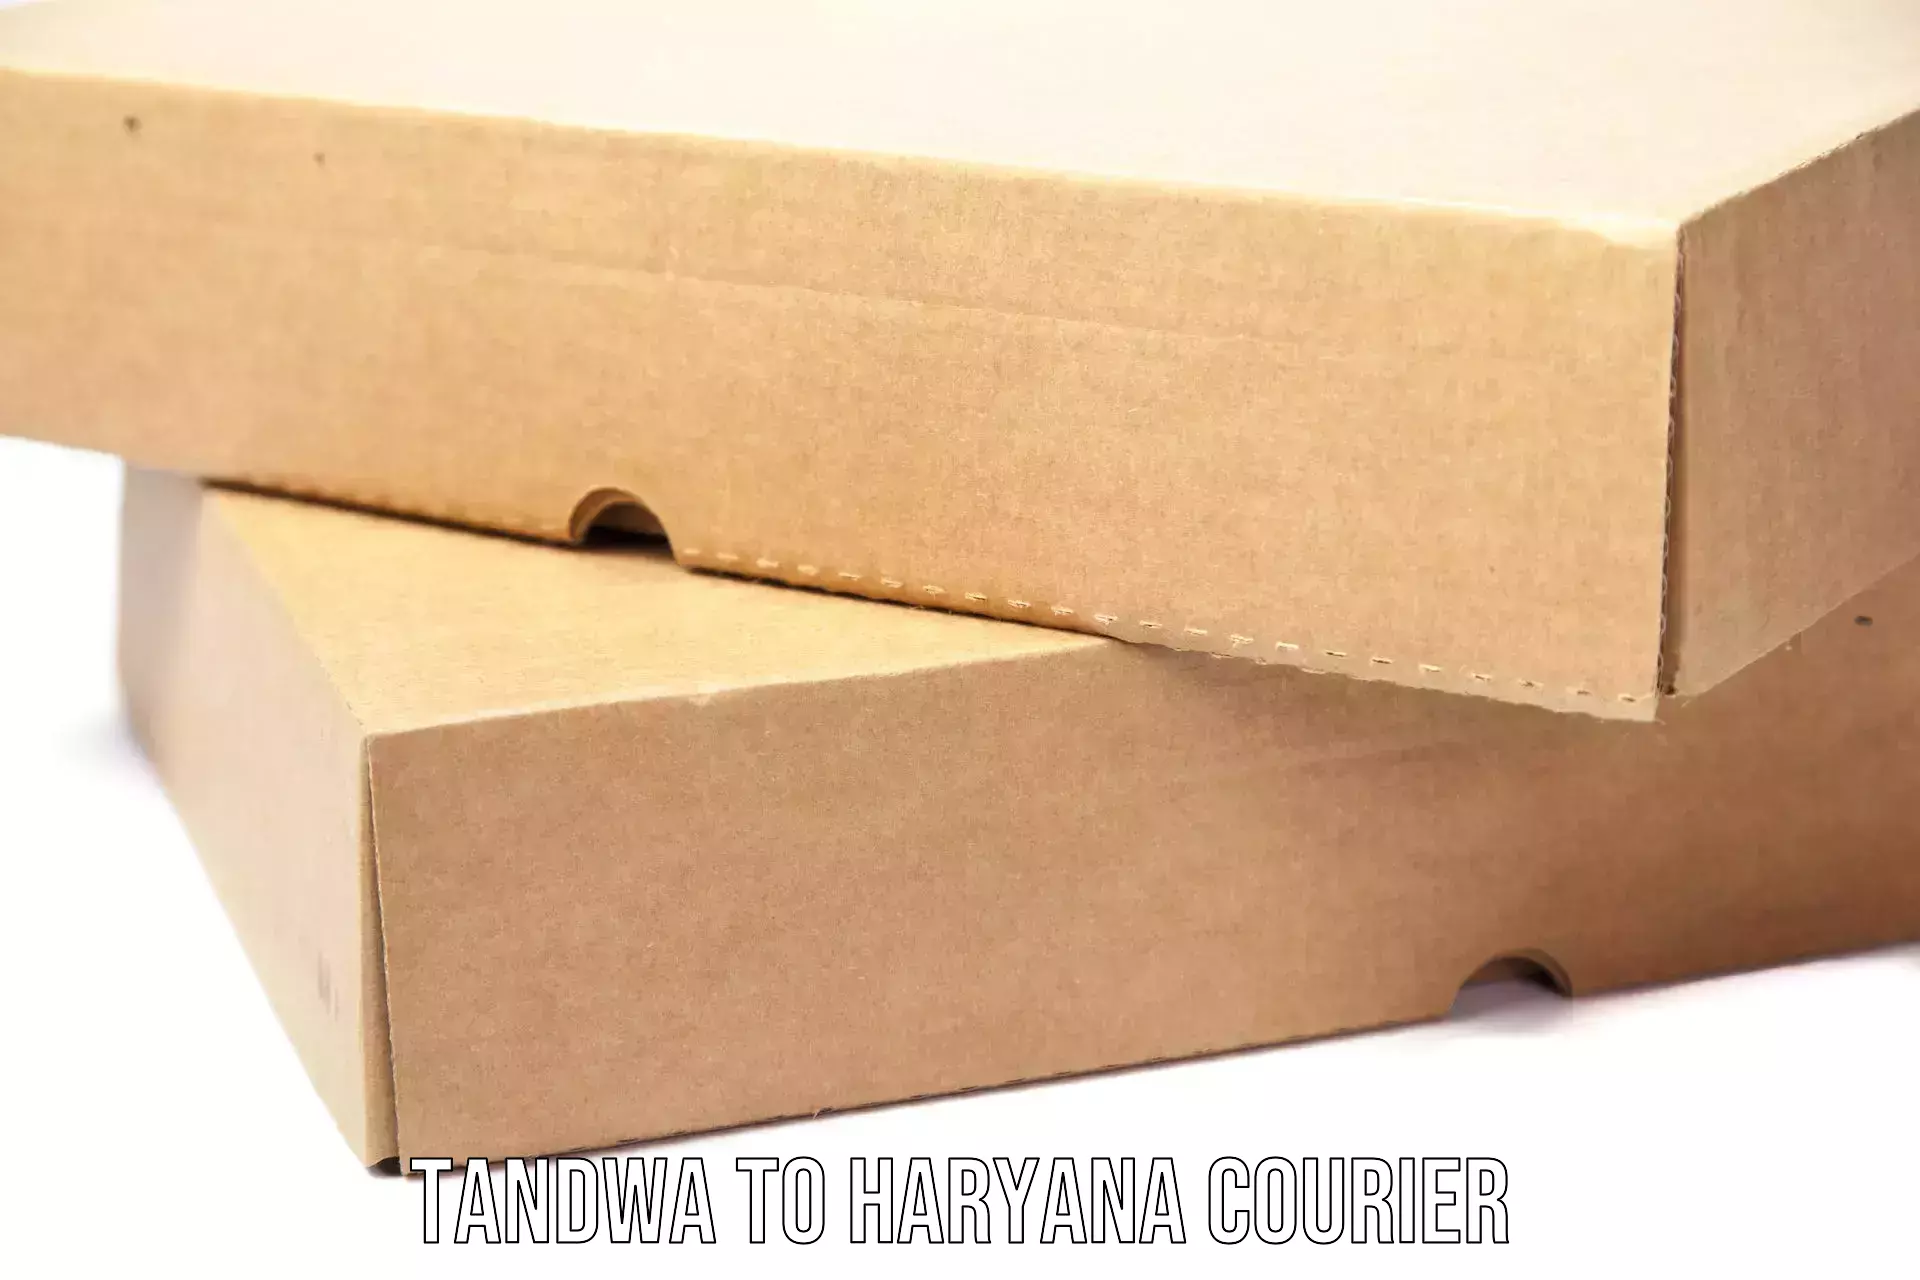 Sustainable shipping practices Tandwa to Haryana